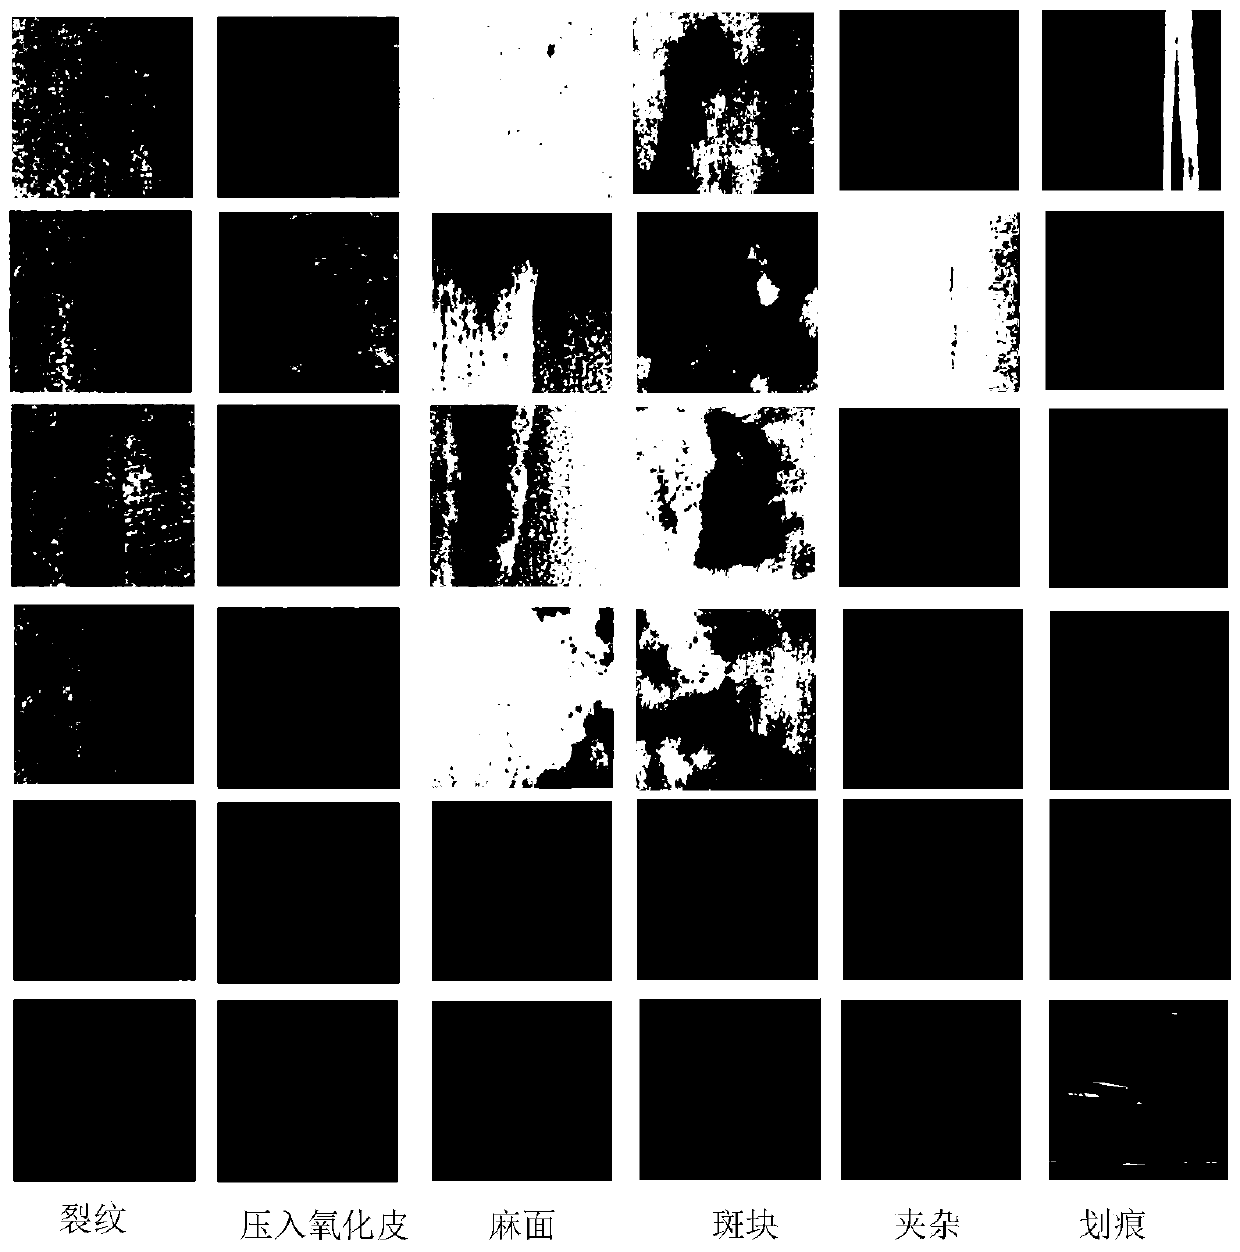 Hot-rolled strip steel surface defect classification method based on convolutional neural network